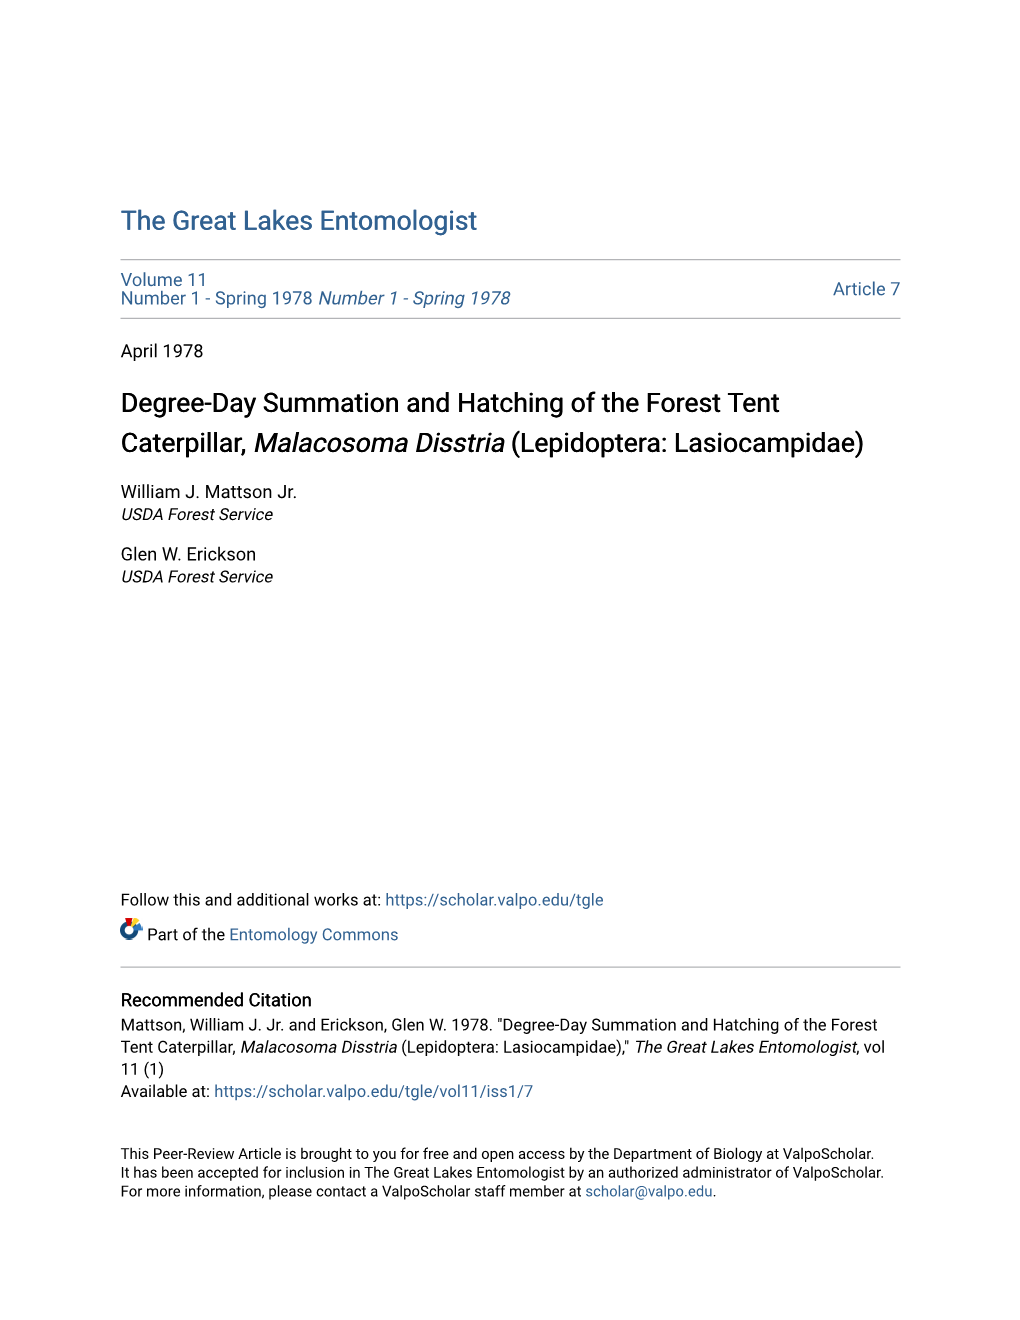 Degree-Day Summation and Hatching of the Forest Tent Caterpillar, Malacosoma Disstria (Lepidoptera: Lasiocampidae)